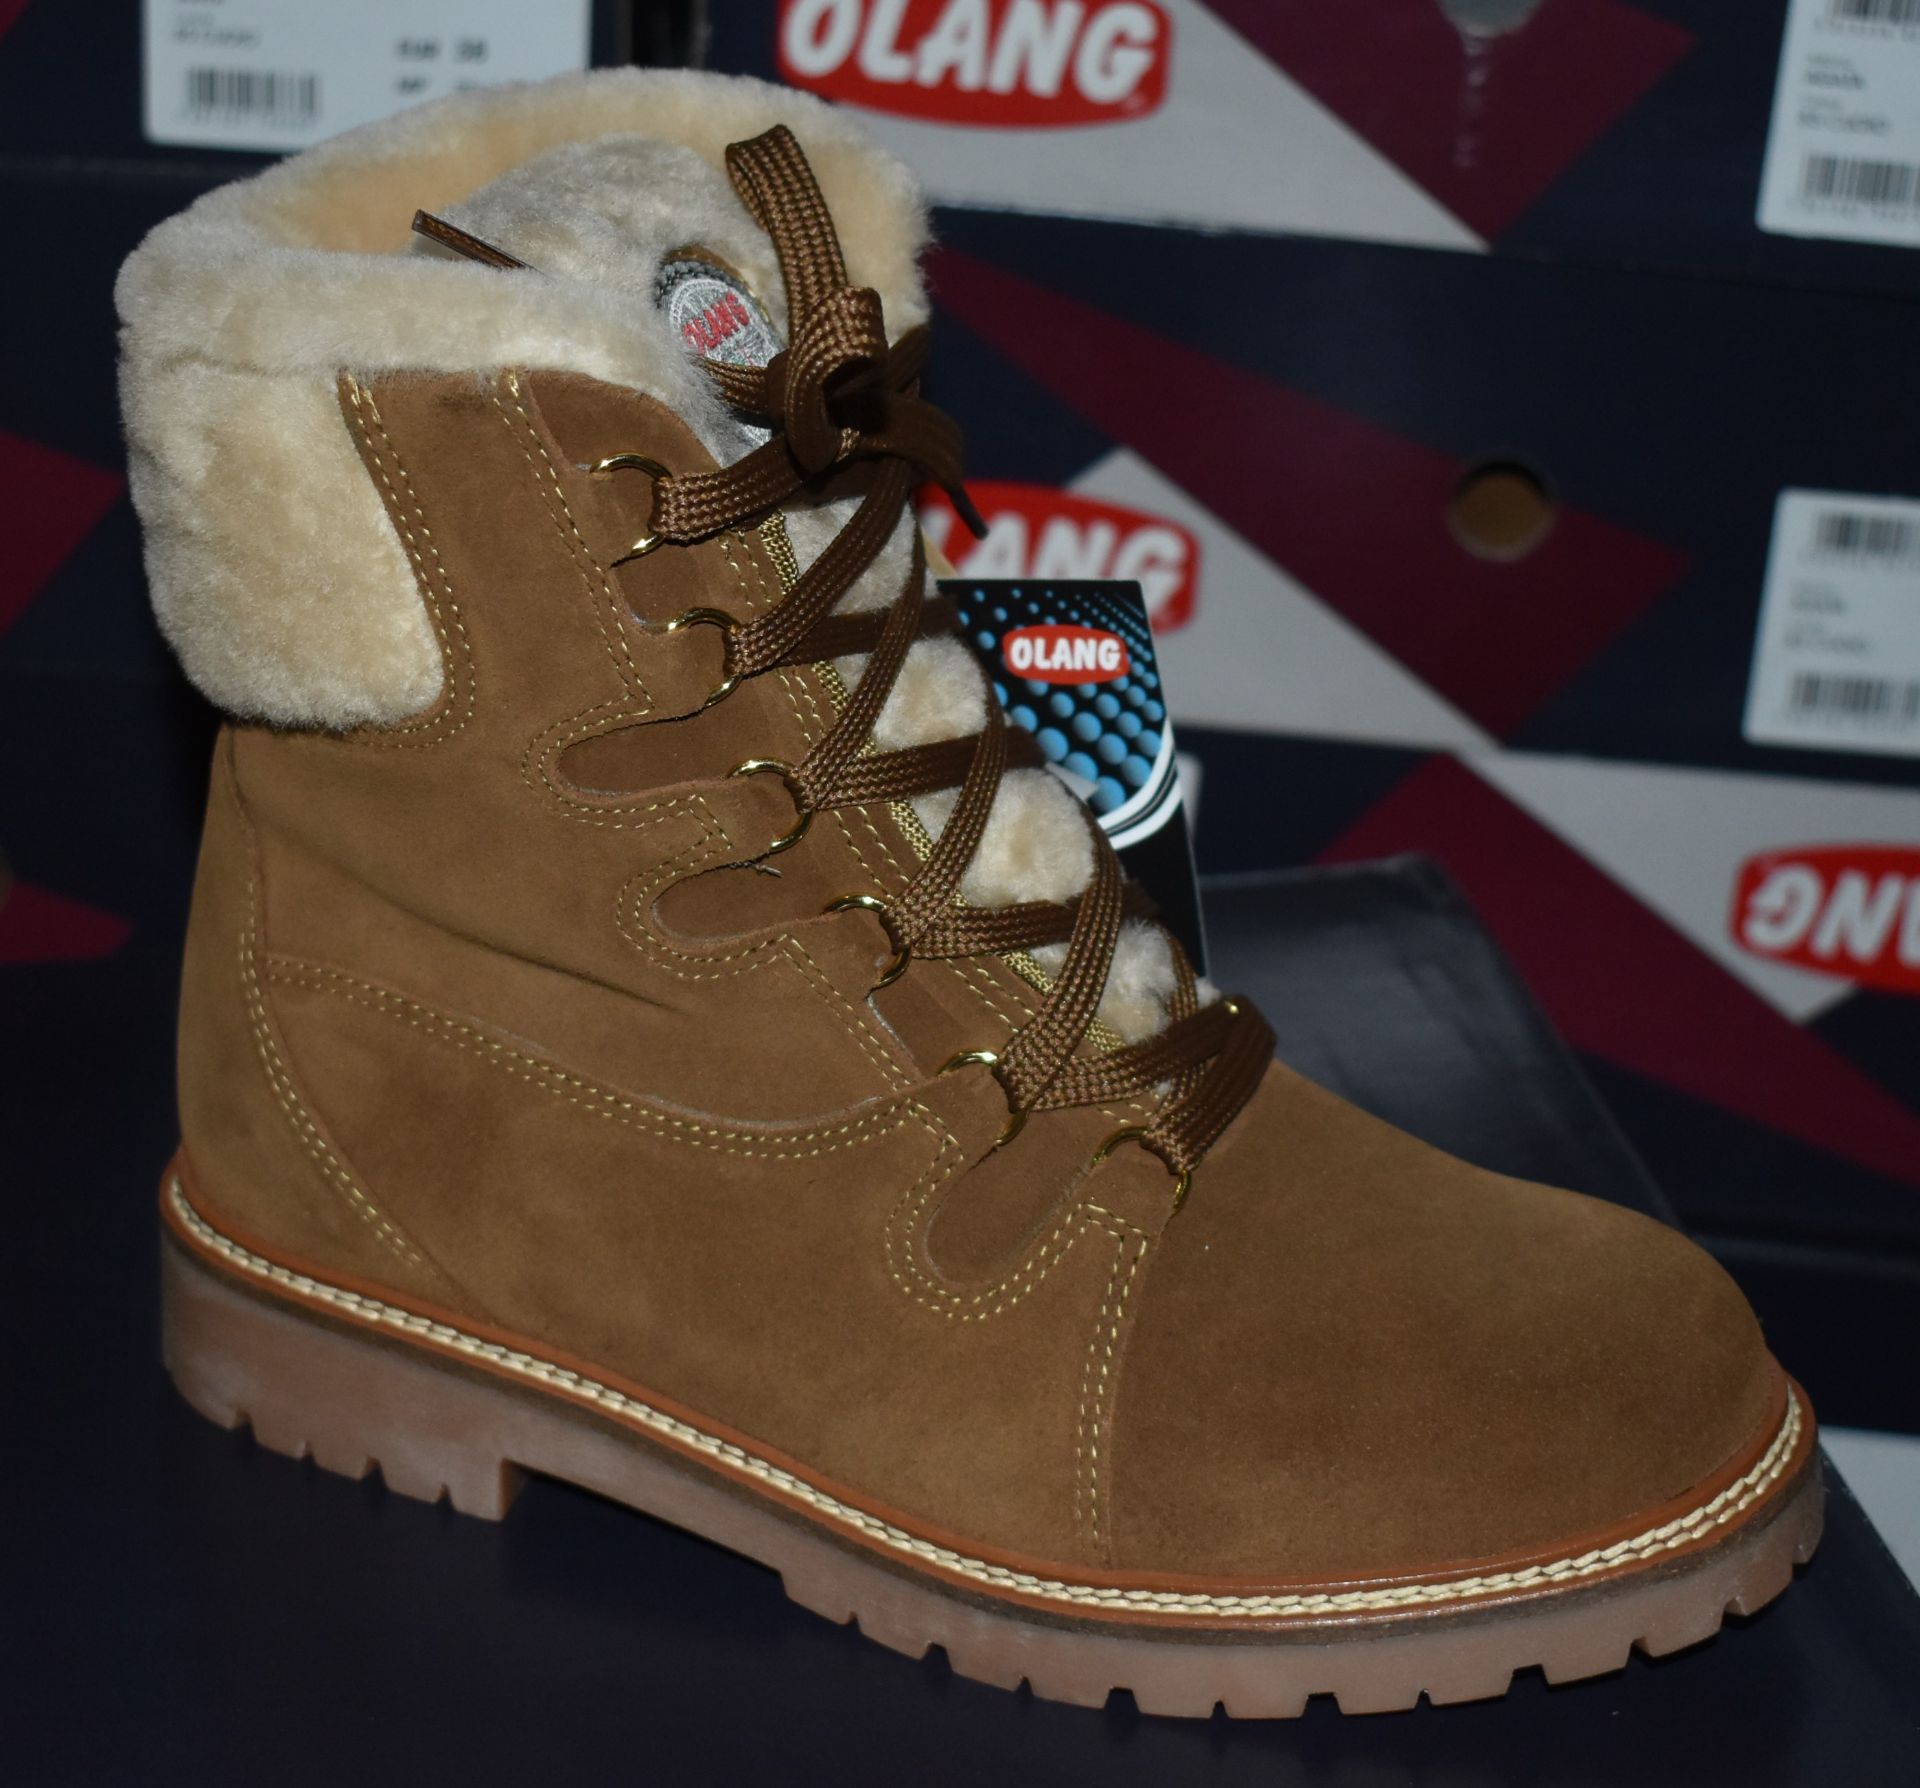 1 x Pair of Designer Olang Meribel 85 CUOIO Women's Winter Boots - Euro Size 39 - Brand New Boxed - Image 8 of 8